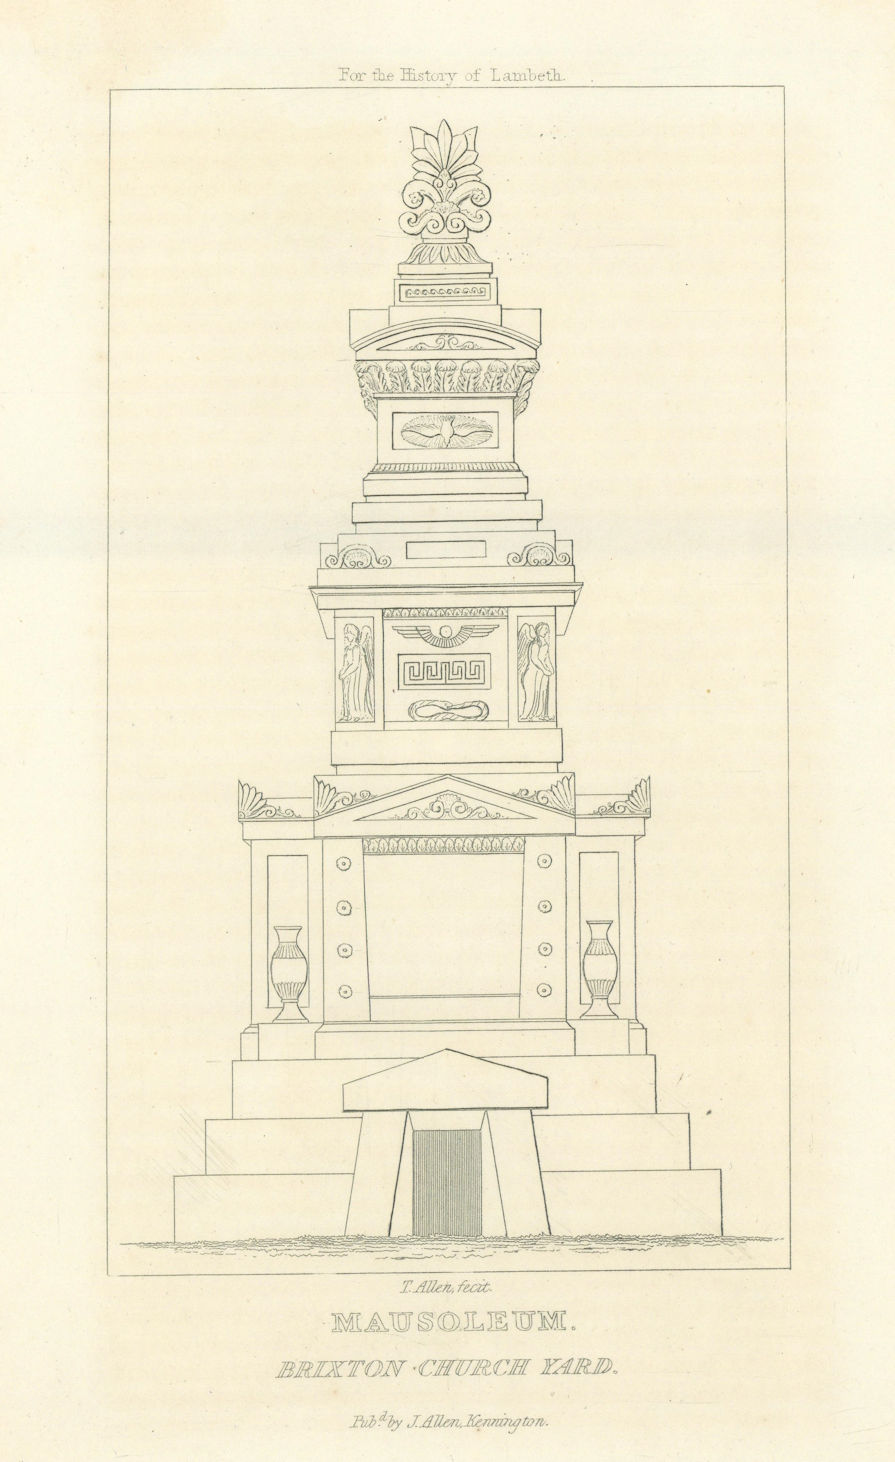 Associate Product Mausoleum in St. Matthew's church-yard, Brixton 1827 old antique print picture